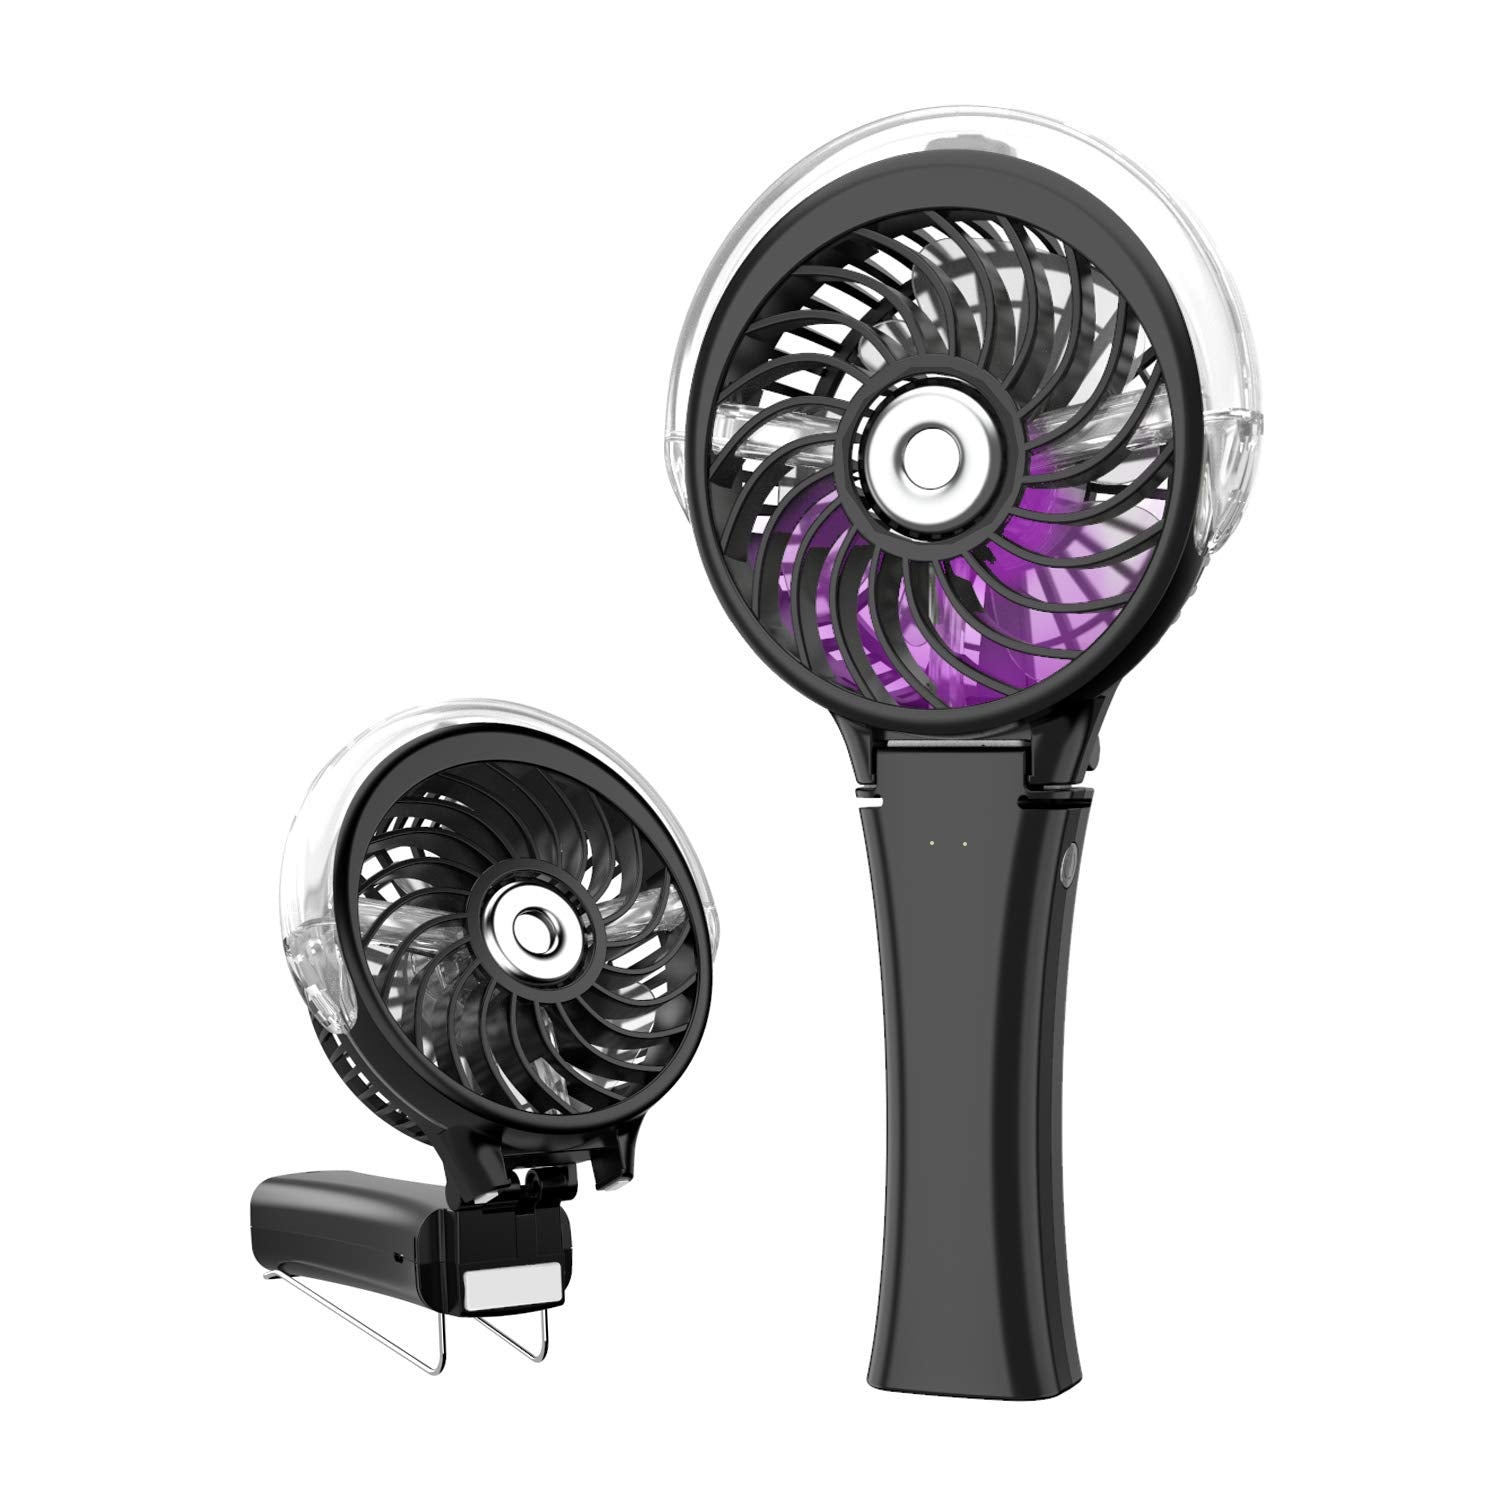 HandFan Personal Fan Handheld Water Misting Fan with Colorful Nightlight Mini USB Desk Fan 2000mAh Rechargeable Battery Operated 3-13H Working Time for Office Outdoor Travel Camping